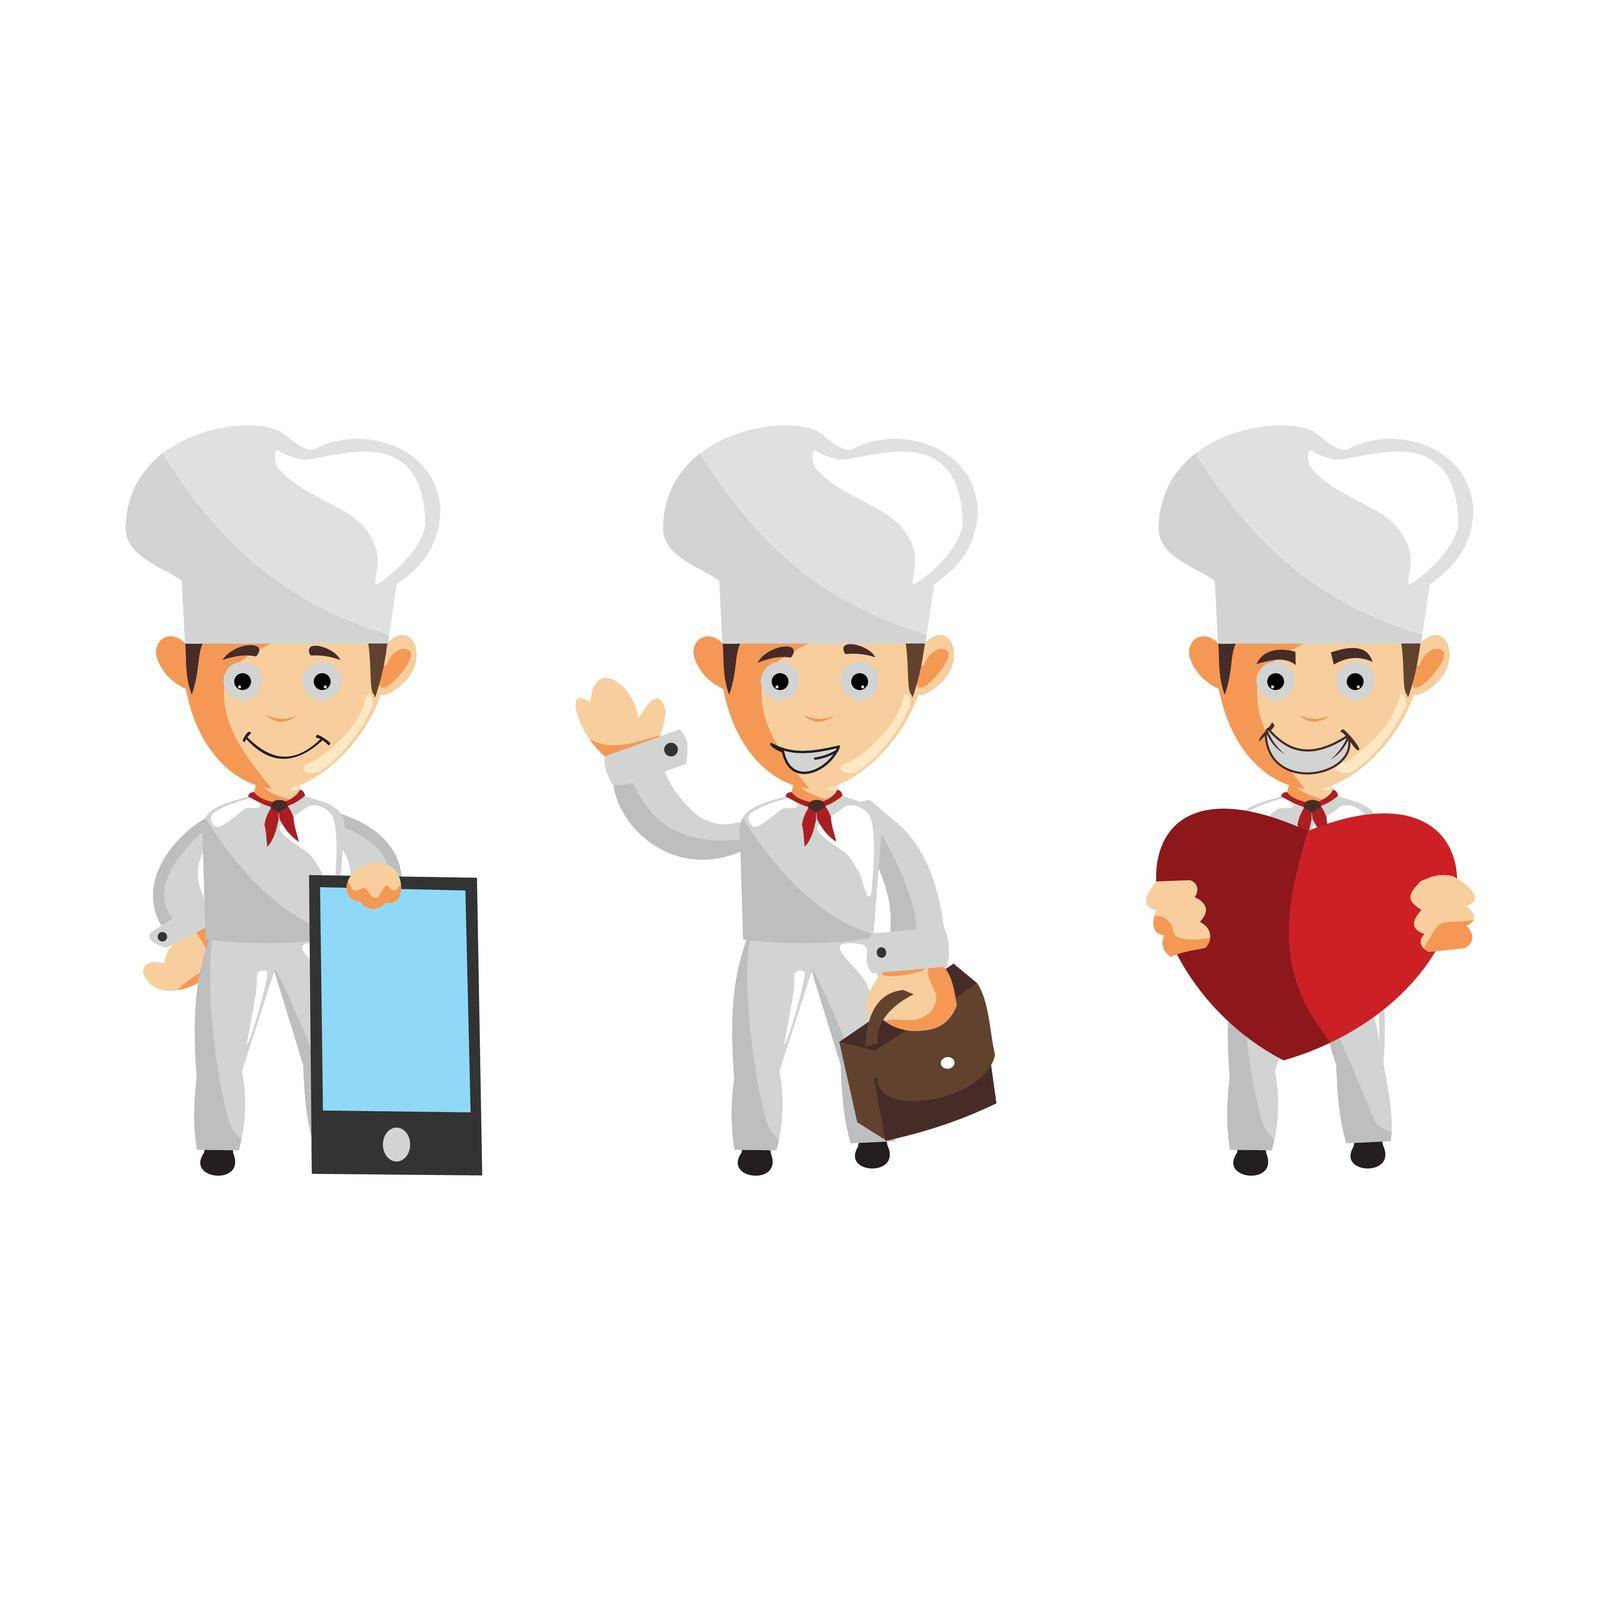 Chef character creation Illustration Template Set